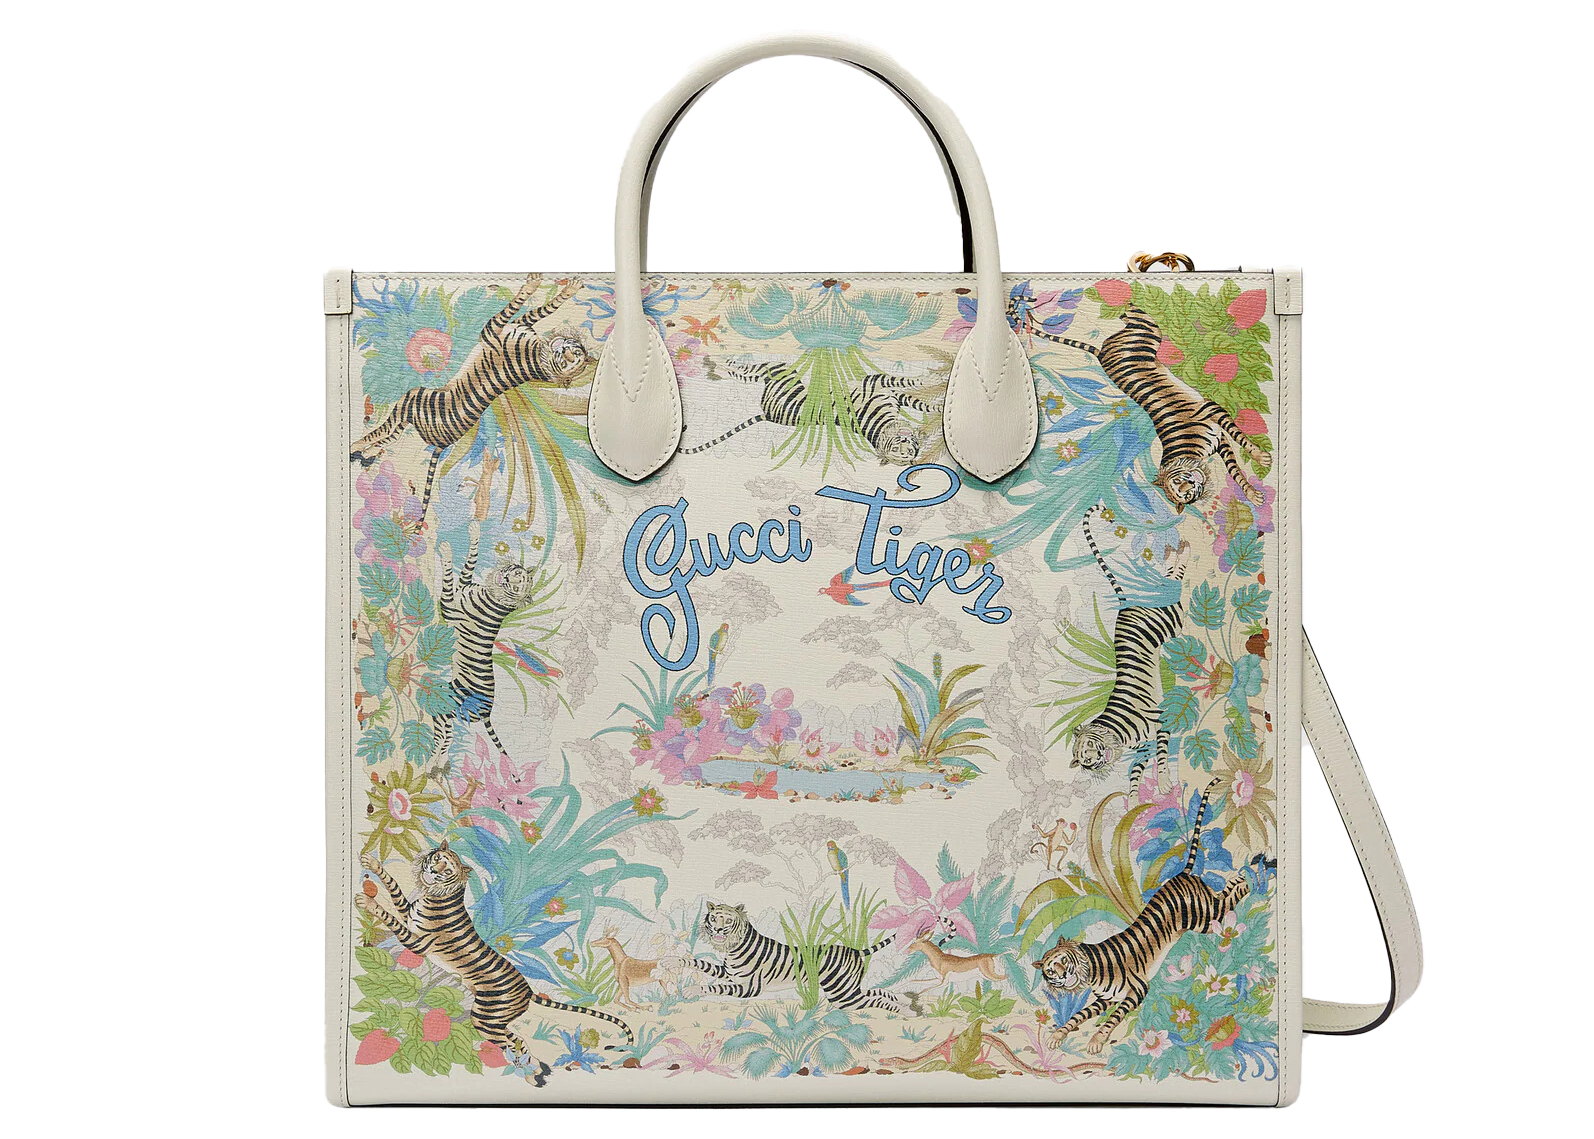 Gucci Tiger Medium Tote Bag Off White in Canvas/Leather with Gold ...